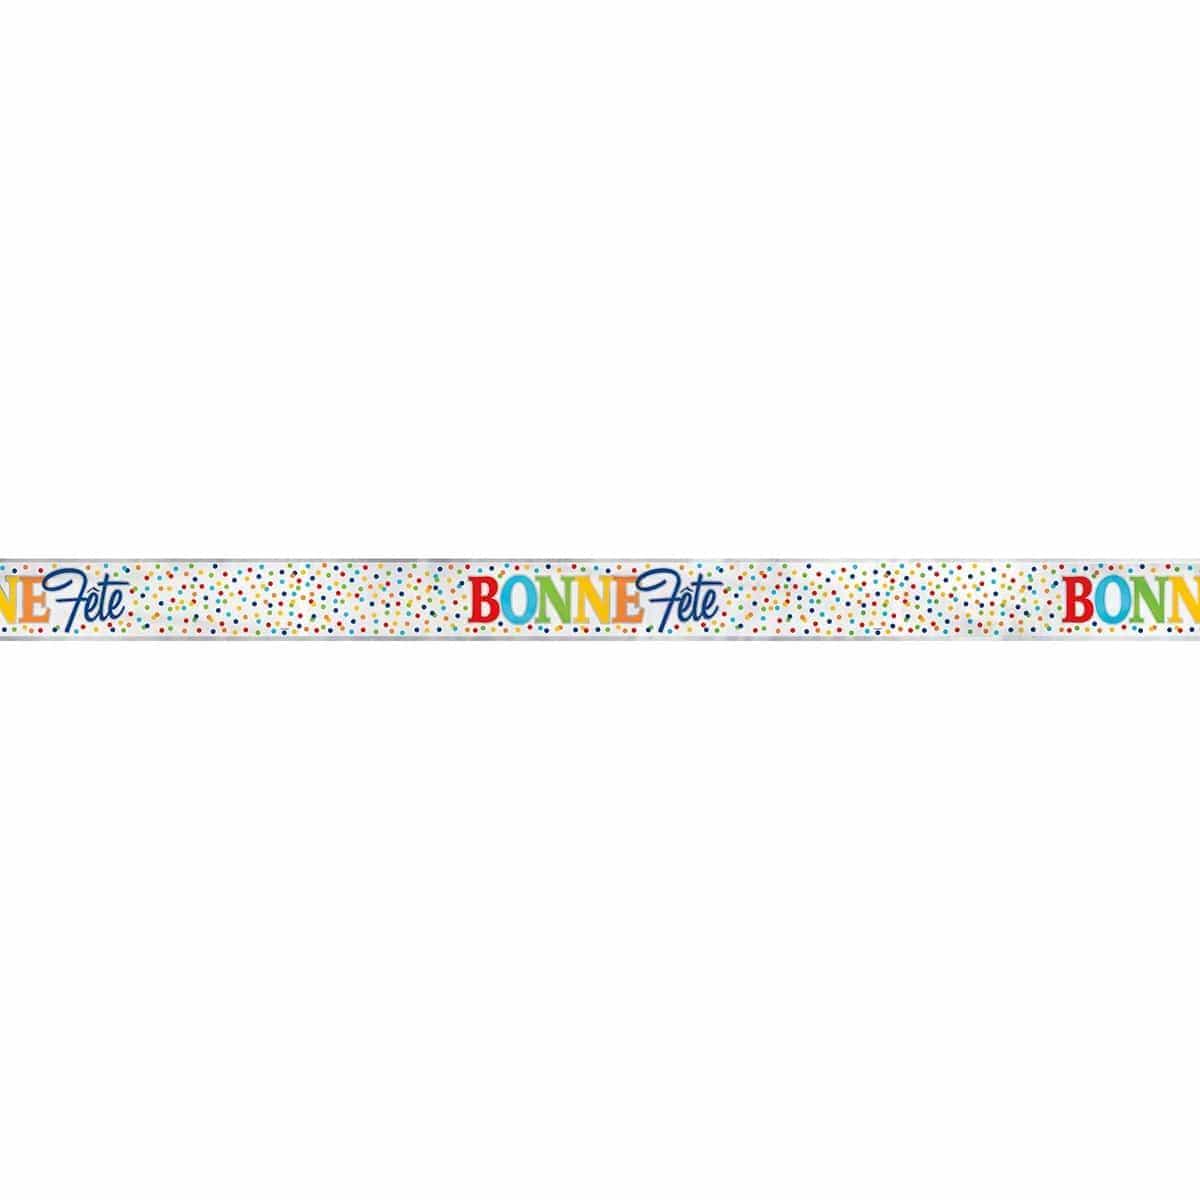 Buy General Birthday Rainbow Polka Dot - Foil Banner 12pi. sold at Party Expert